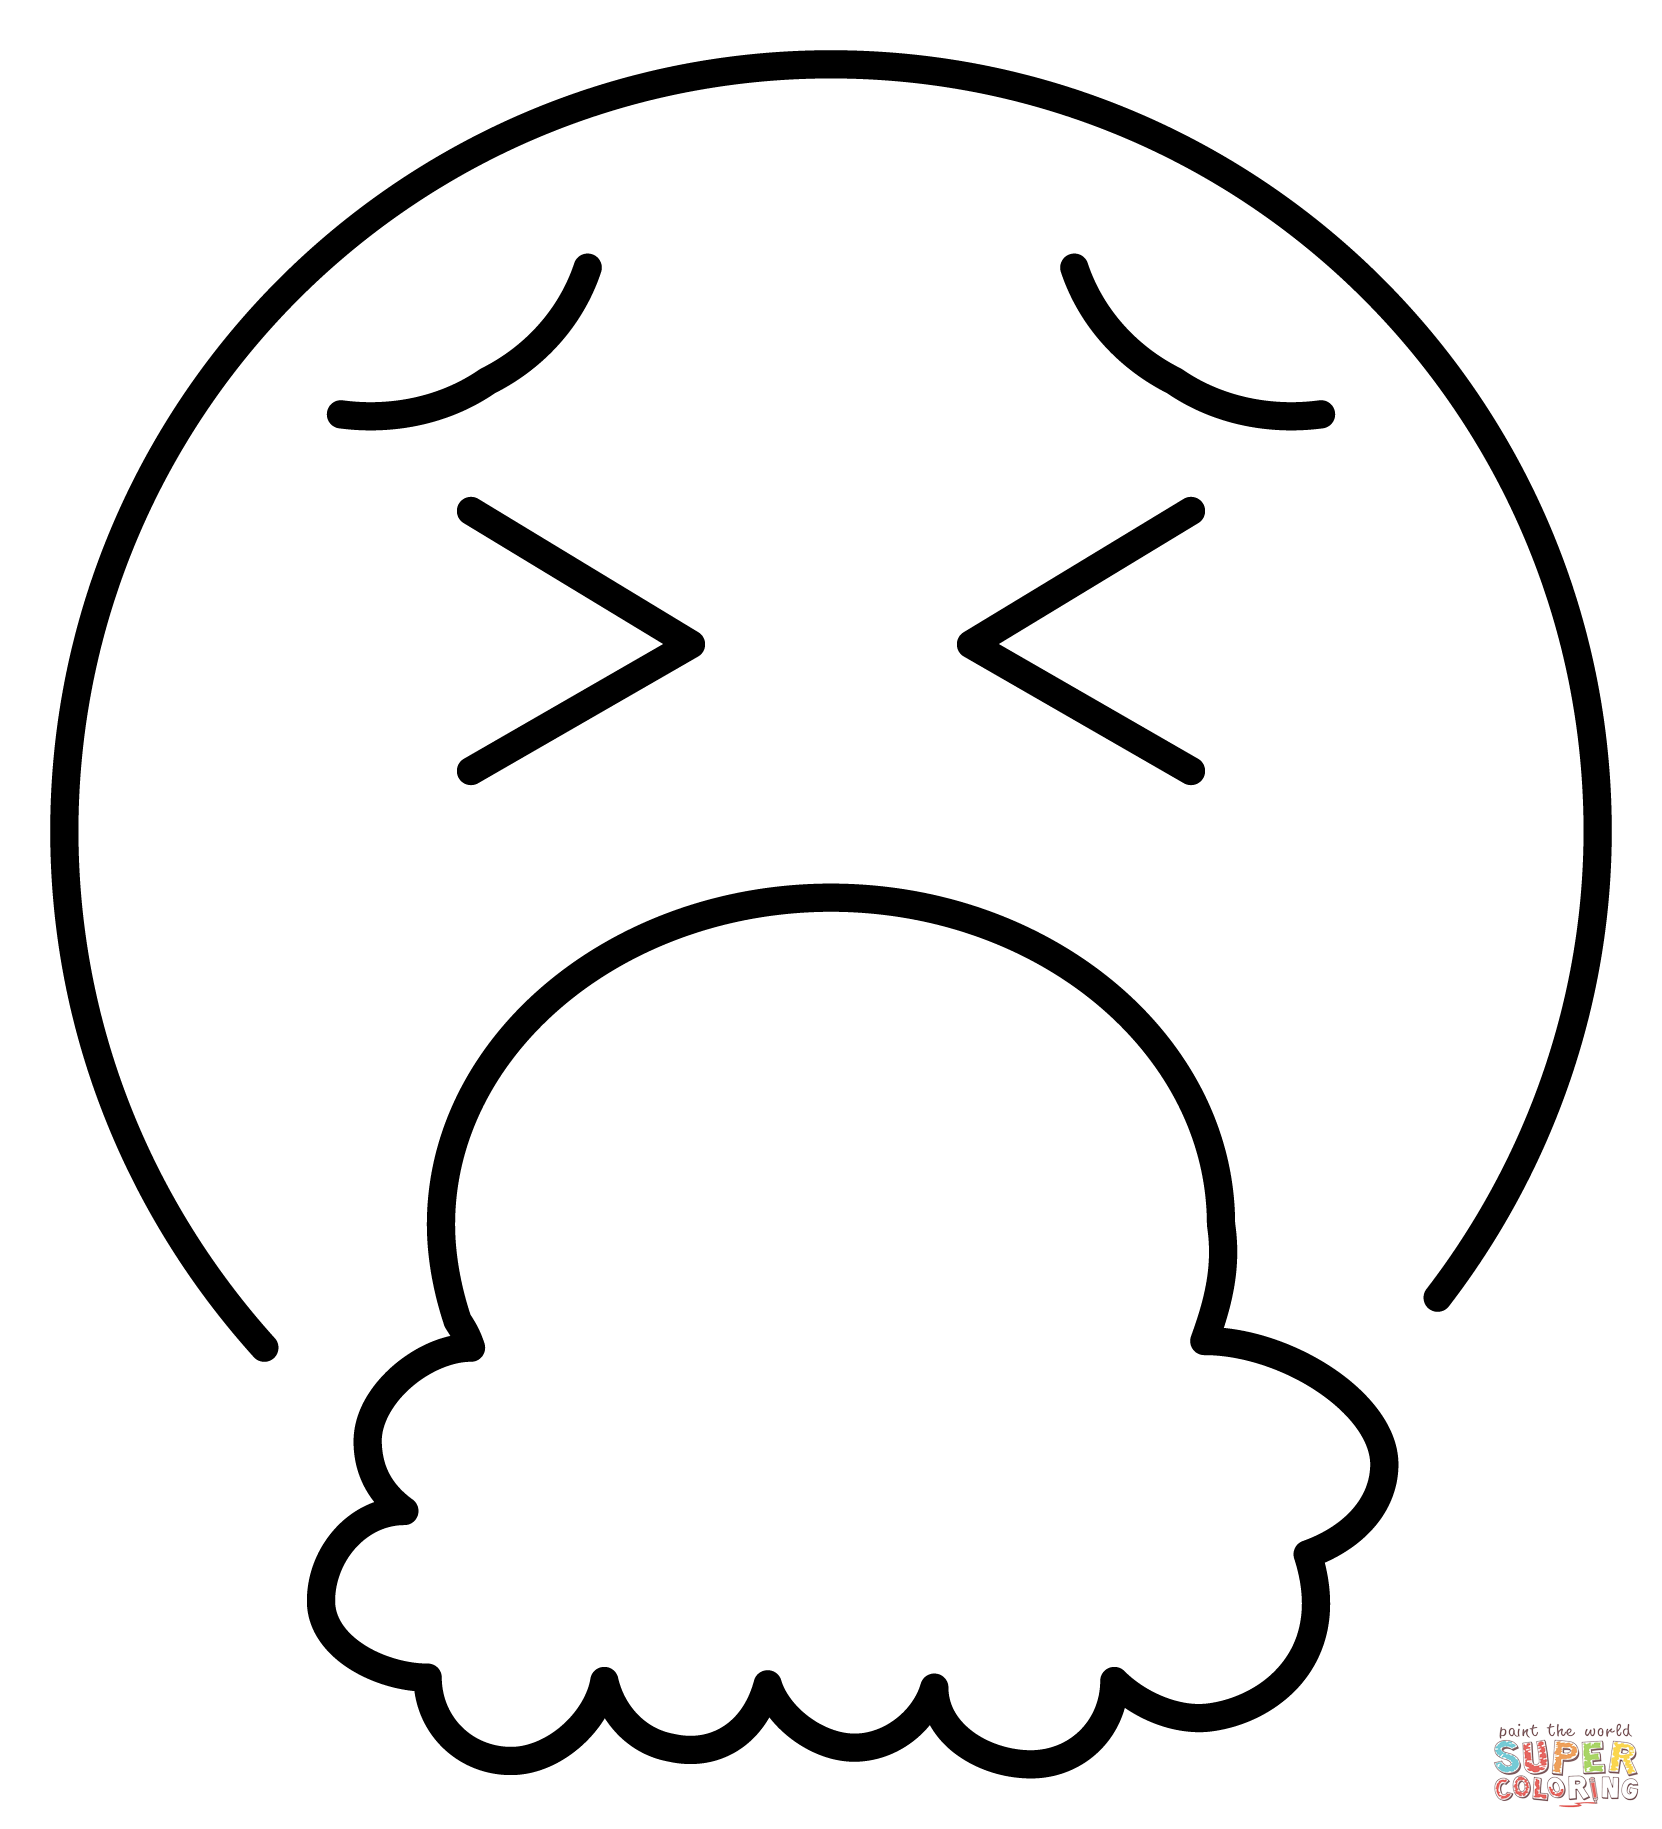 Face vomiting emoji coloring page free printable coloring pages